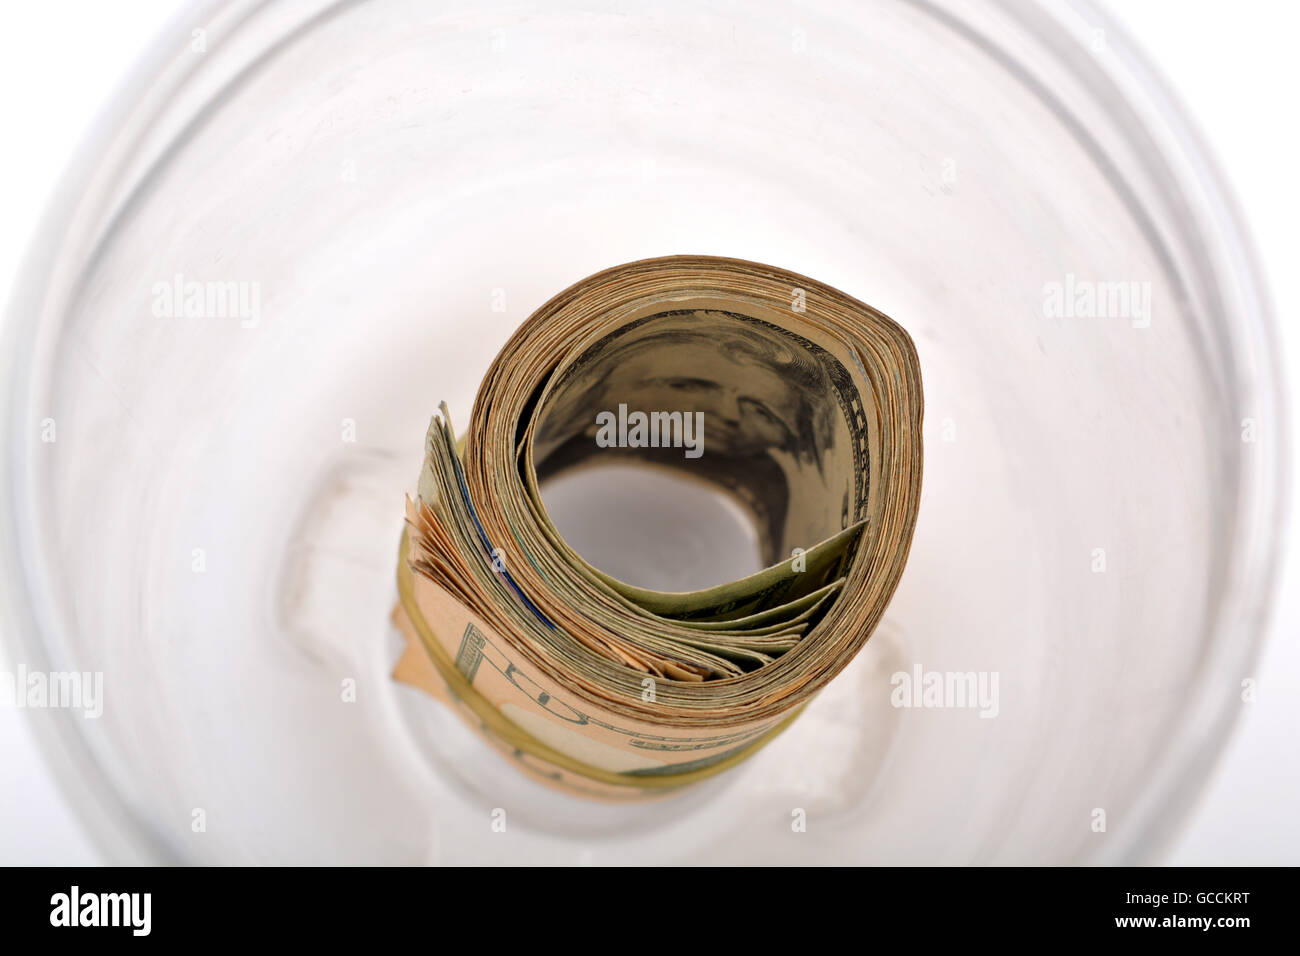 Pile of currency notes in jar. Stock Photo